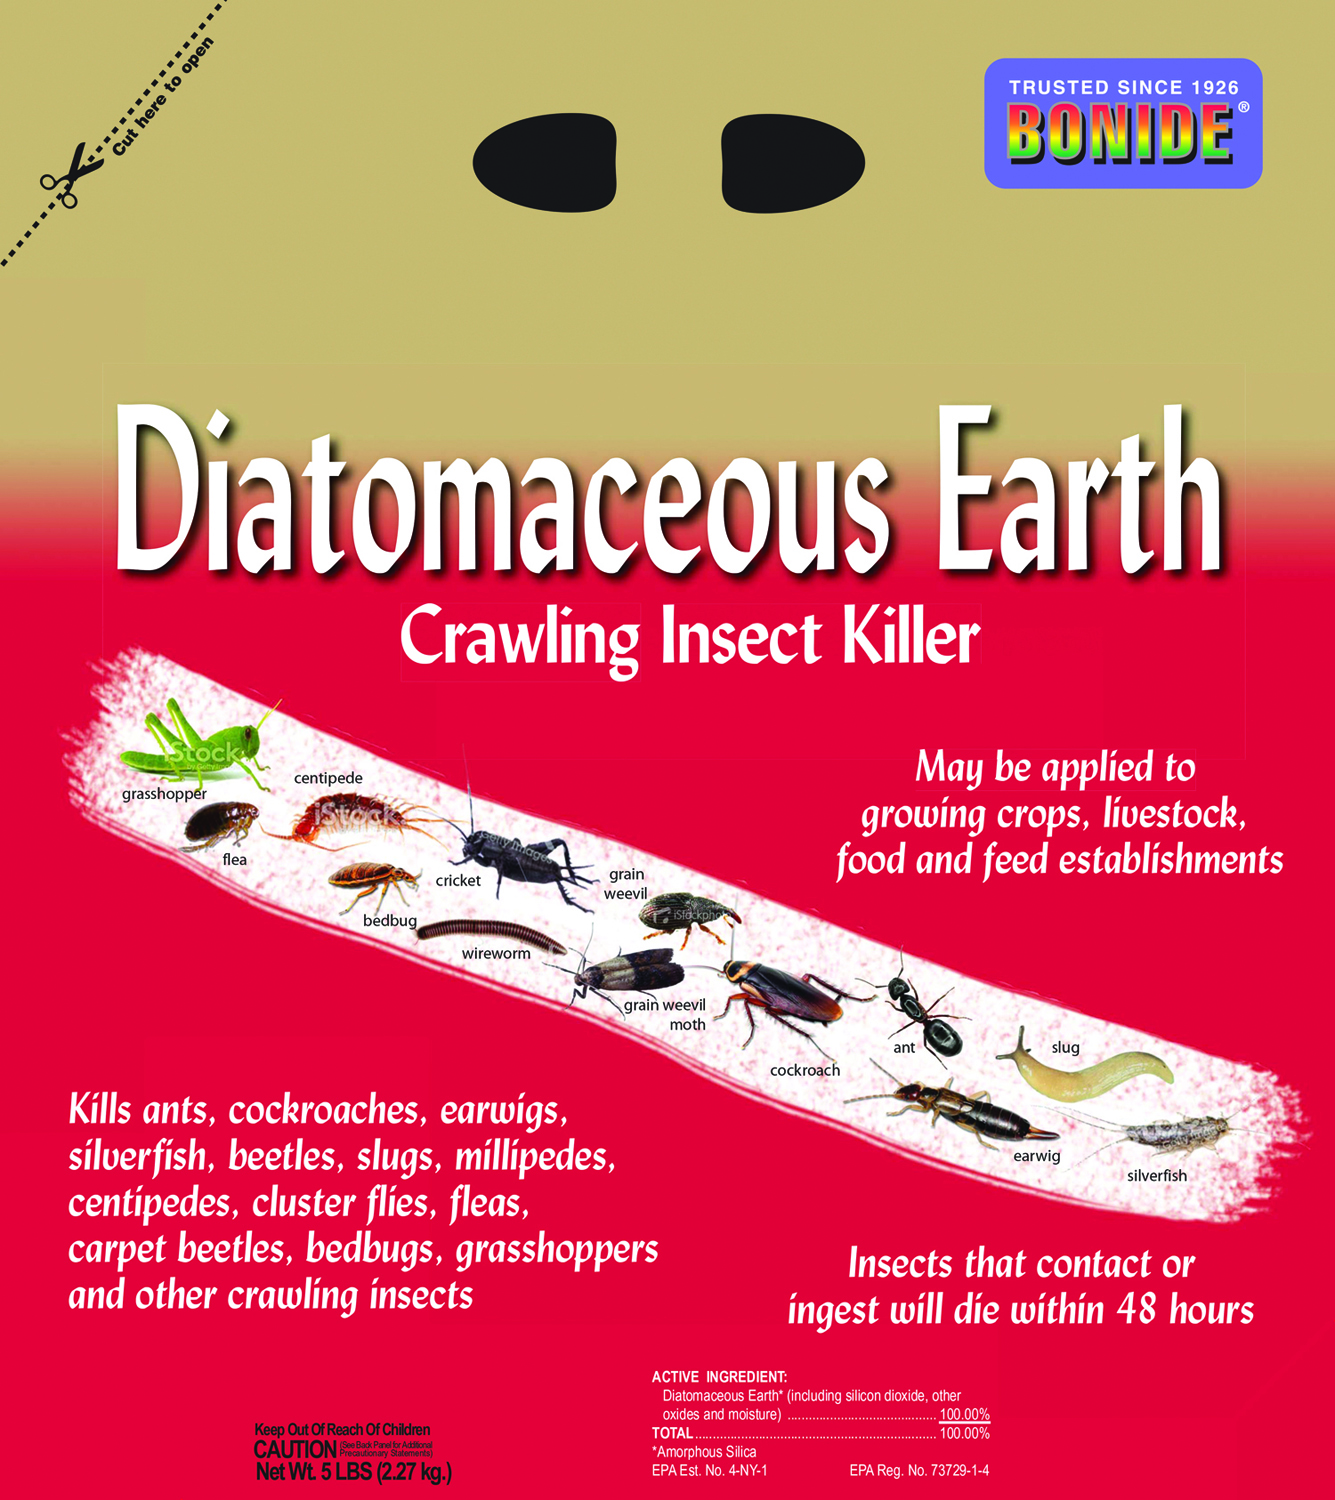 DIATOMACEOUS EARTH CRAWLING INSECT KILLER